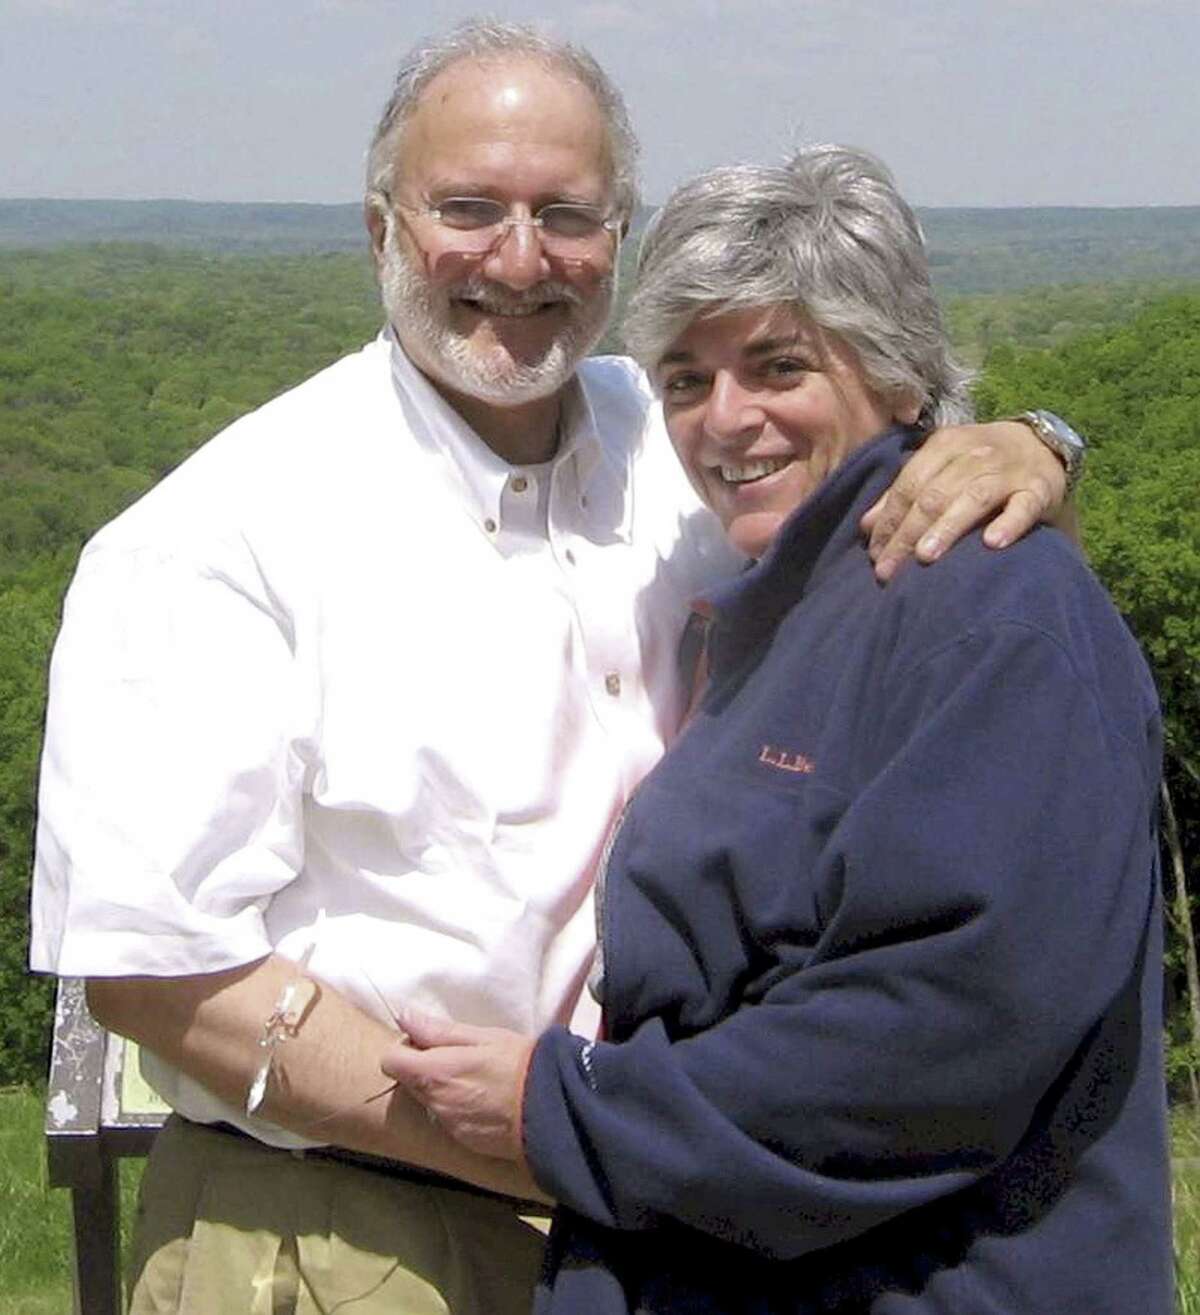 FILE - In this file handout photo provided by the Gross family shows Alan and Judy Gross in an unknown location. Five years to the day after his arrest in Cuba on espionage charges, former U.S. contractor Alan Gross is threatening a hunger strike, refusing almost all visitors and predicting he will die in prison if he isnít freed by his 66th birthday in May, relatives and backers said Wednesday, Dec. 3, 2014. (AP Photo/Gross Family, File)